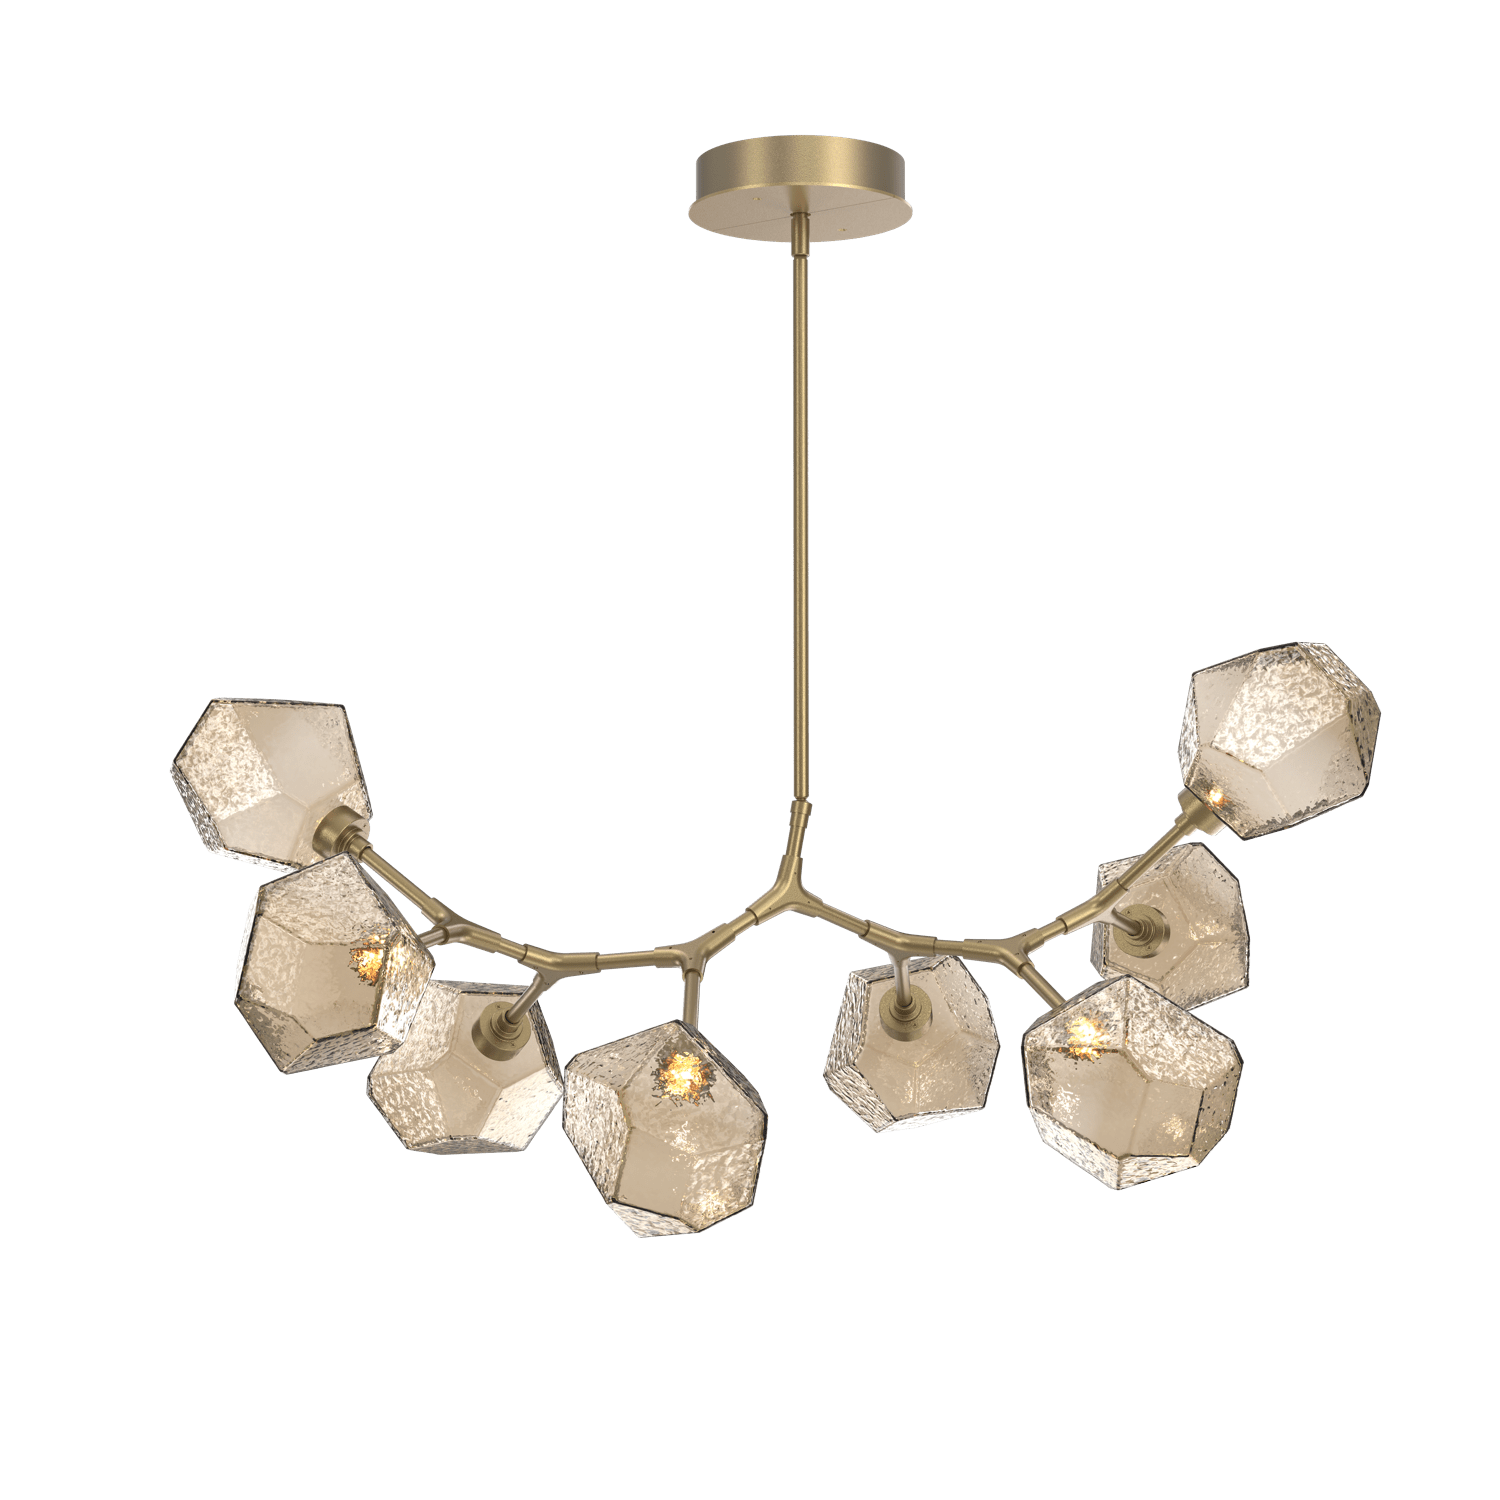 PLB0039-BB-GB-B-Hammerton-Studio-Gem-8-light-modern-branch-chandelier-with-gilded-brass-finish-and-bronze-blown-glass-shades-and-LED-lamping